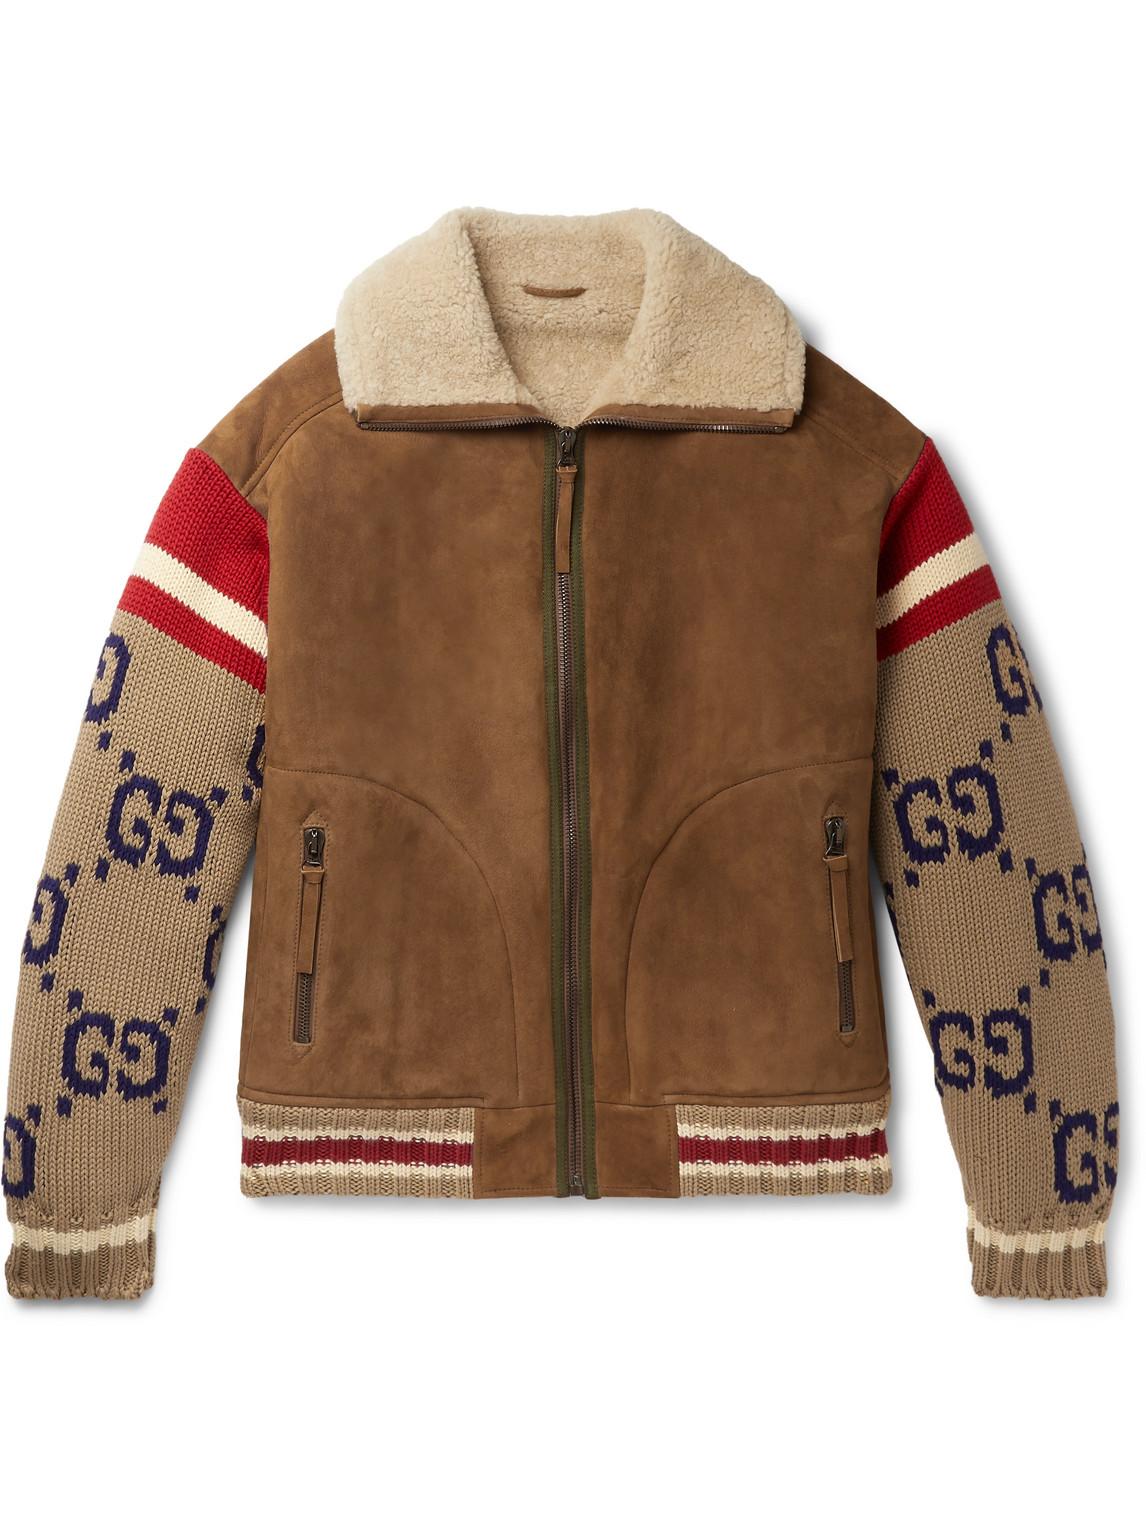 Gucci Knitted Sleeve Shearling Suede Jacket for Men | Lyst